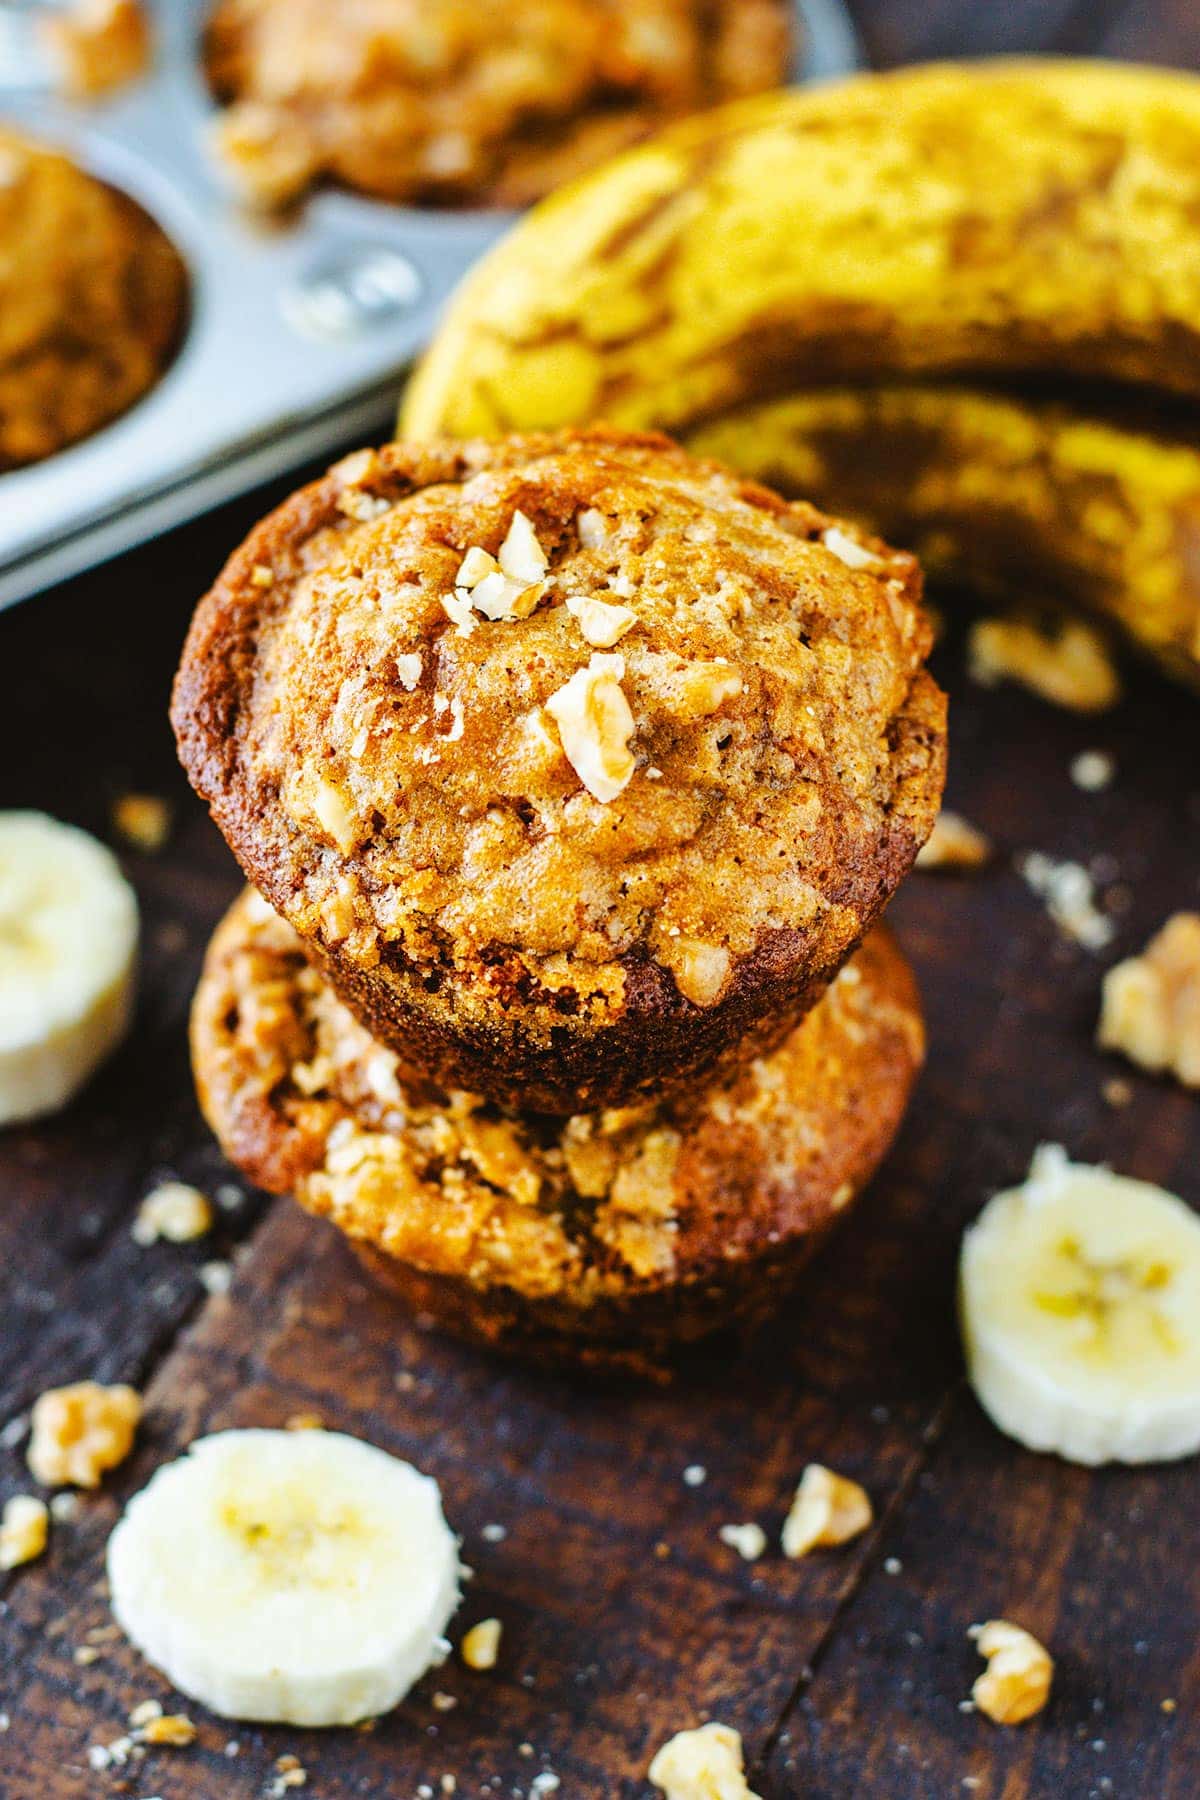 Two stacked Banana Nut Muffins on a wooden serving tray with ripened bananas and a tray of muffins in background.